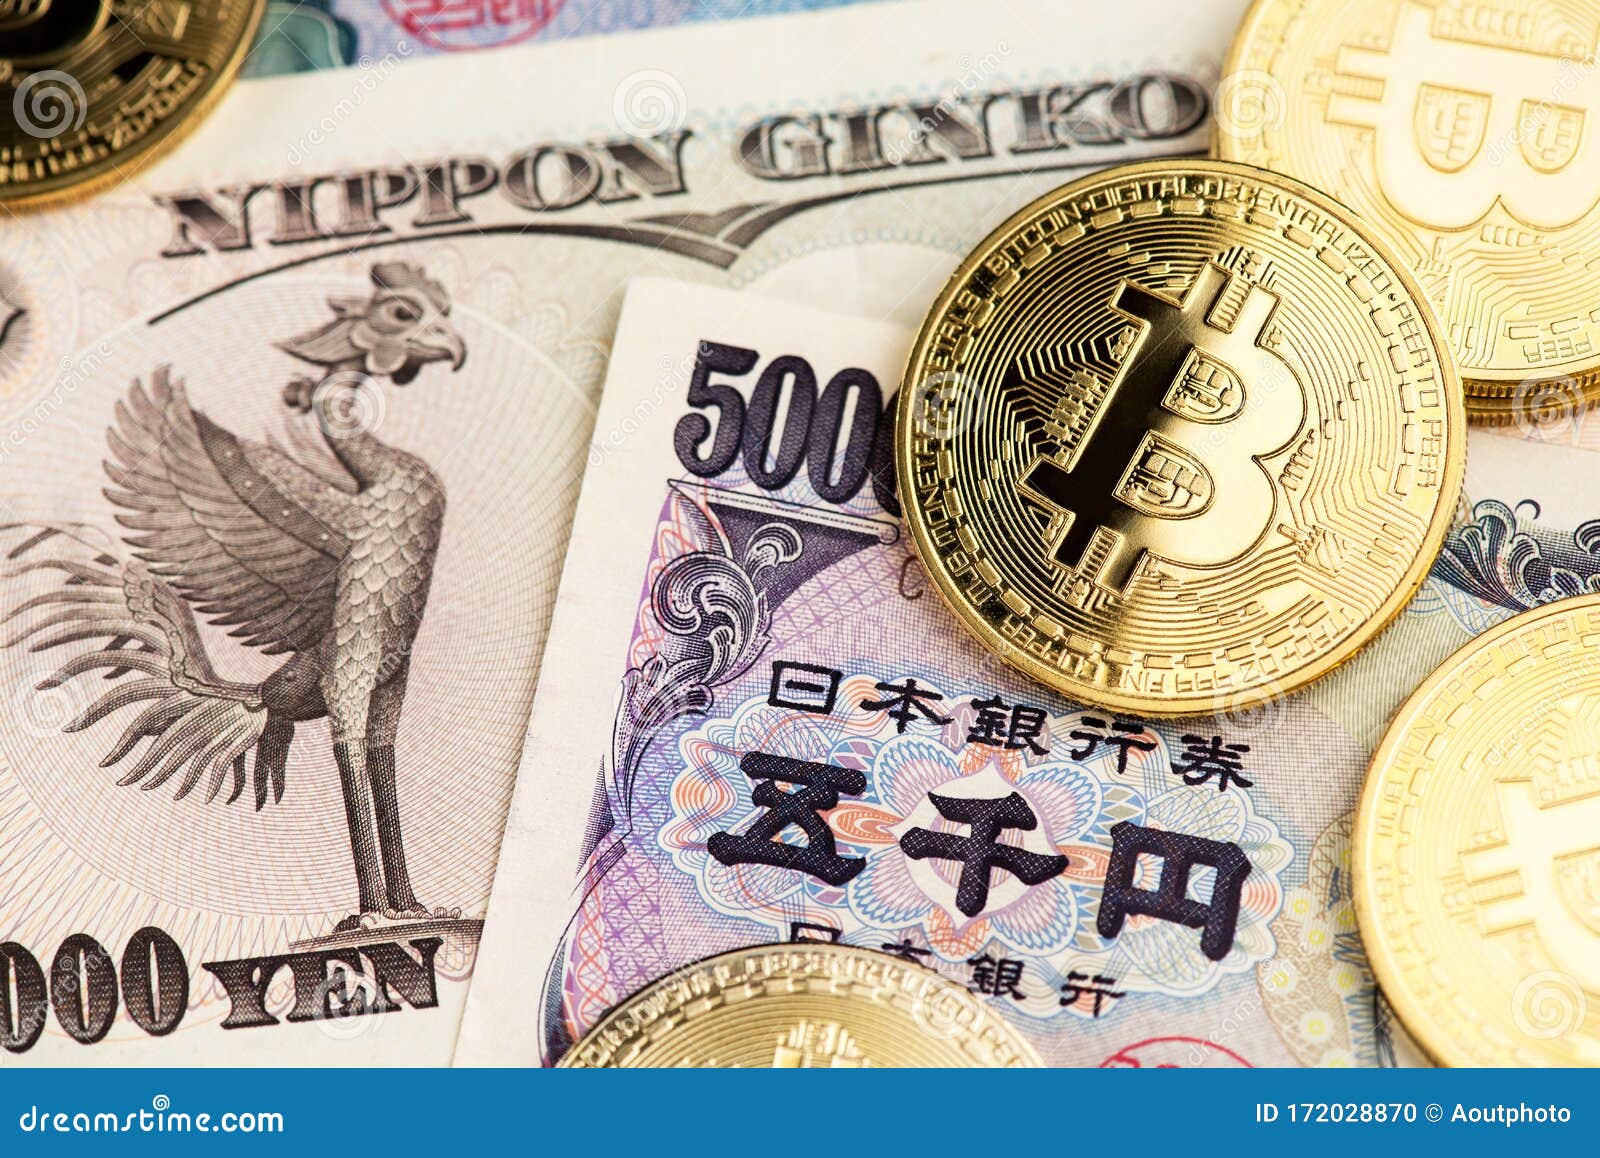 Japan bitcoin official currency what cryptos can i buy on gemini